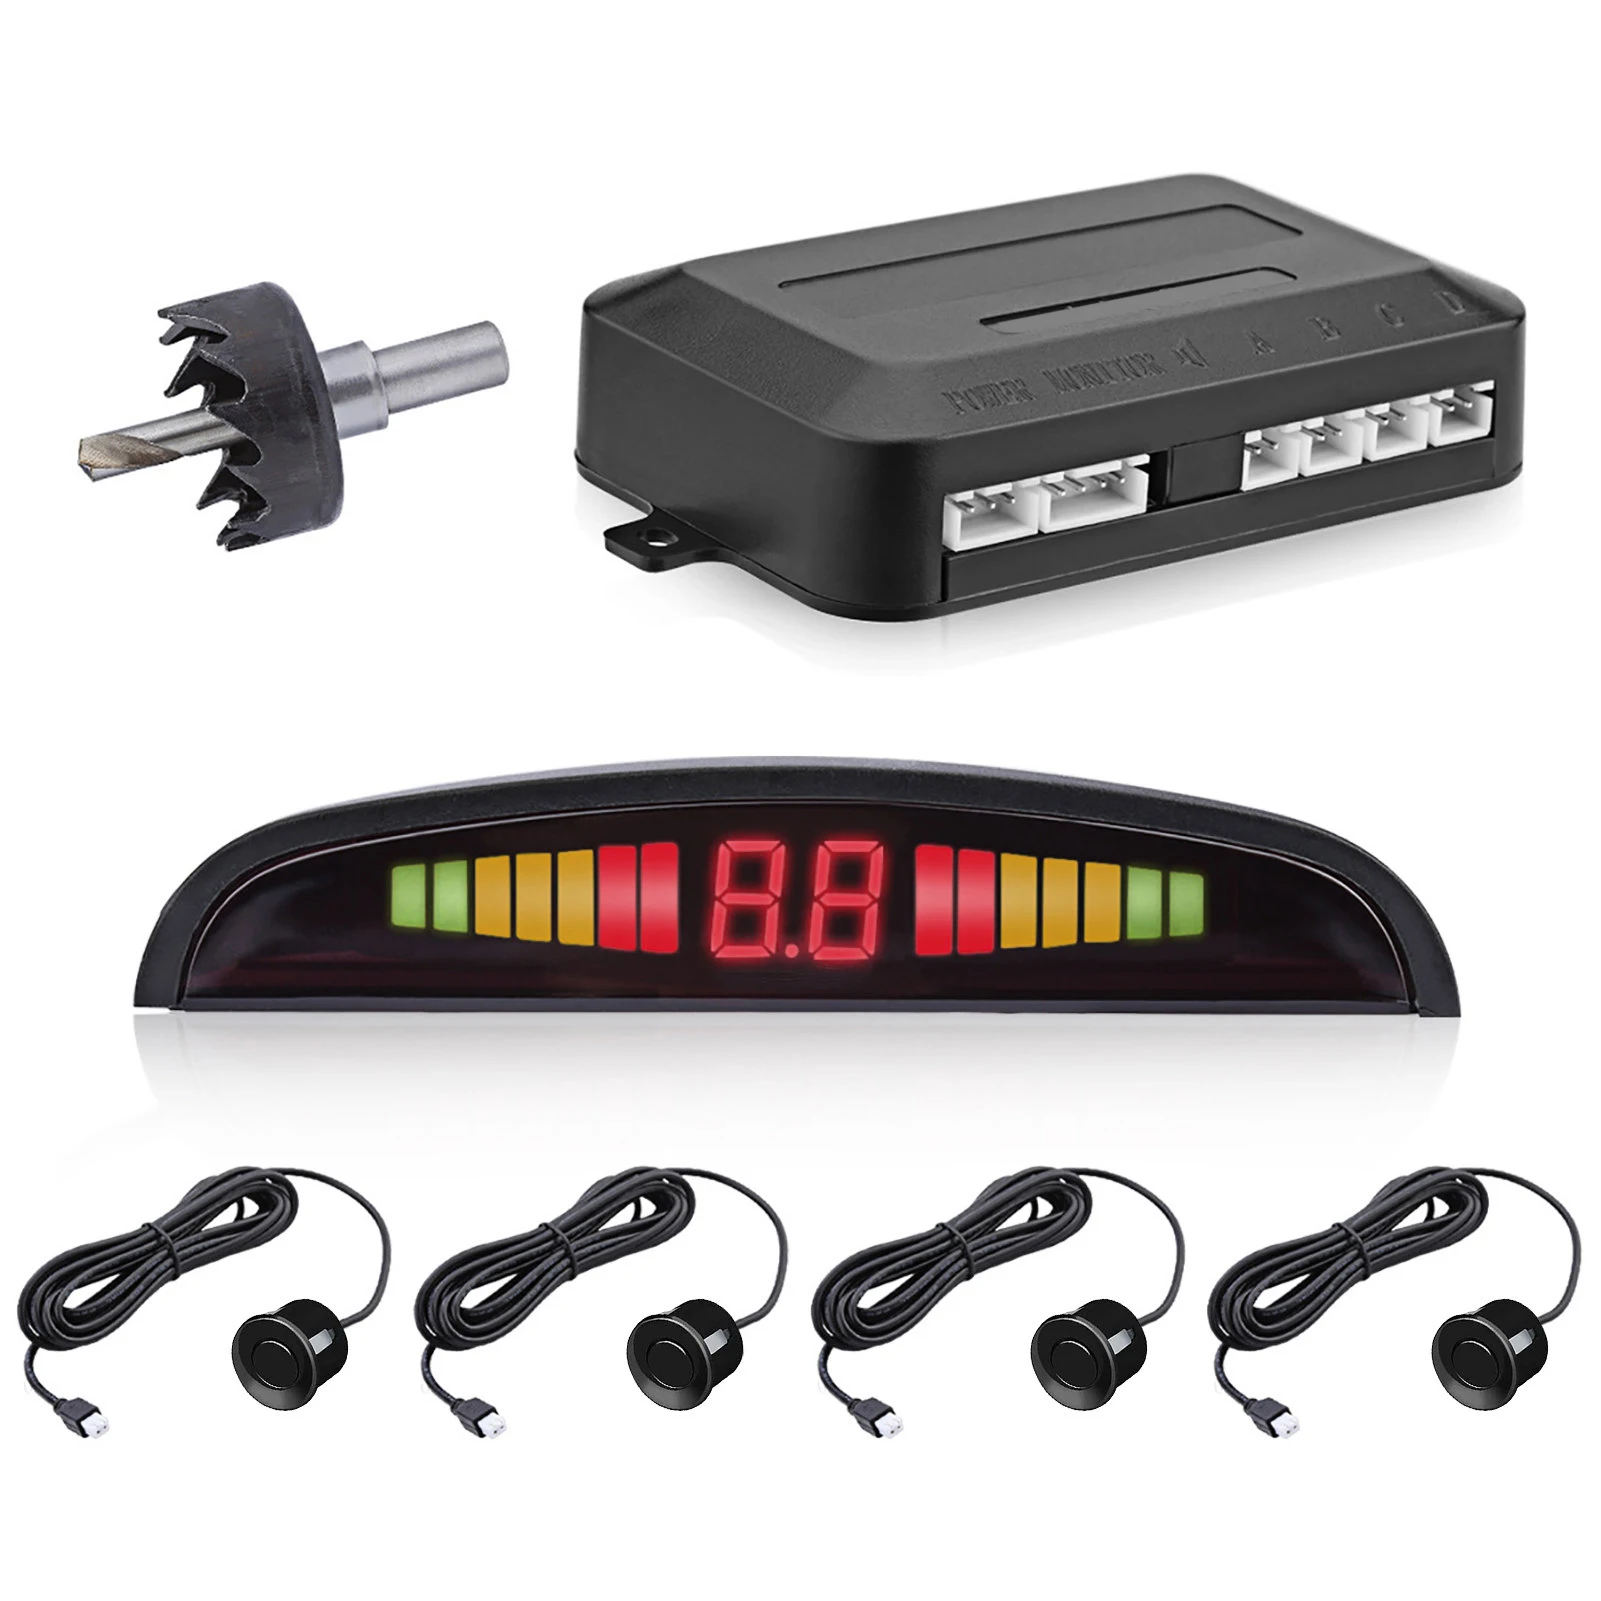 

Car Parking Sensor Auto Vehicle Visual Reverse Backup Radar System with 4 Sensors Garage Parking Aid with LCD Distance Display